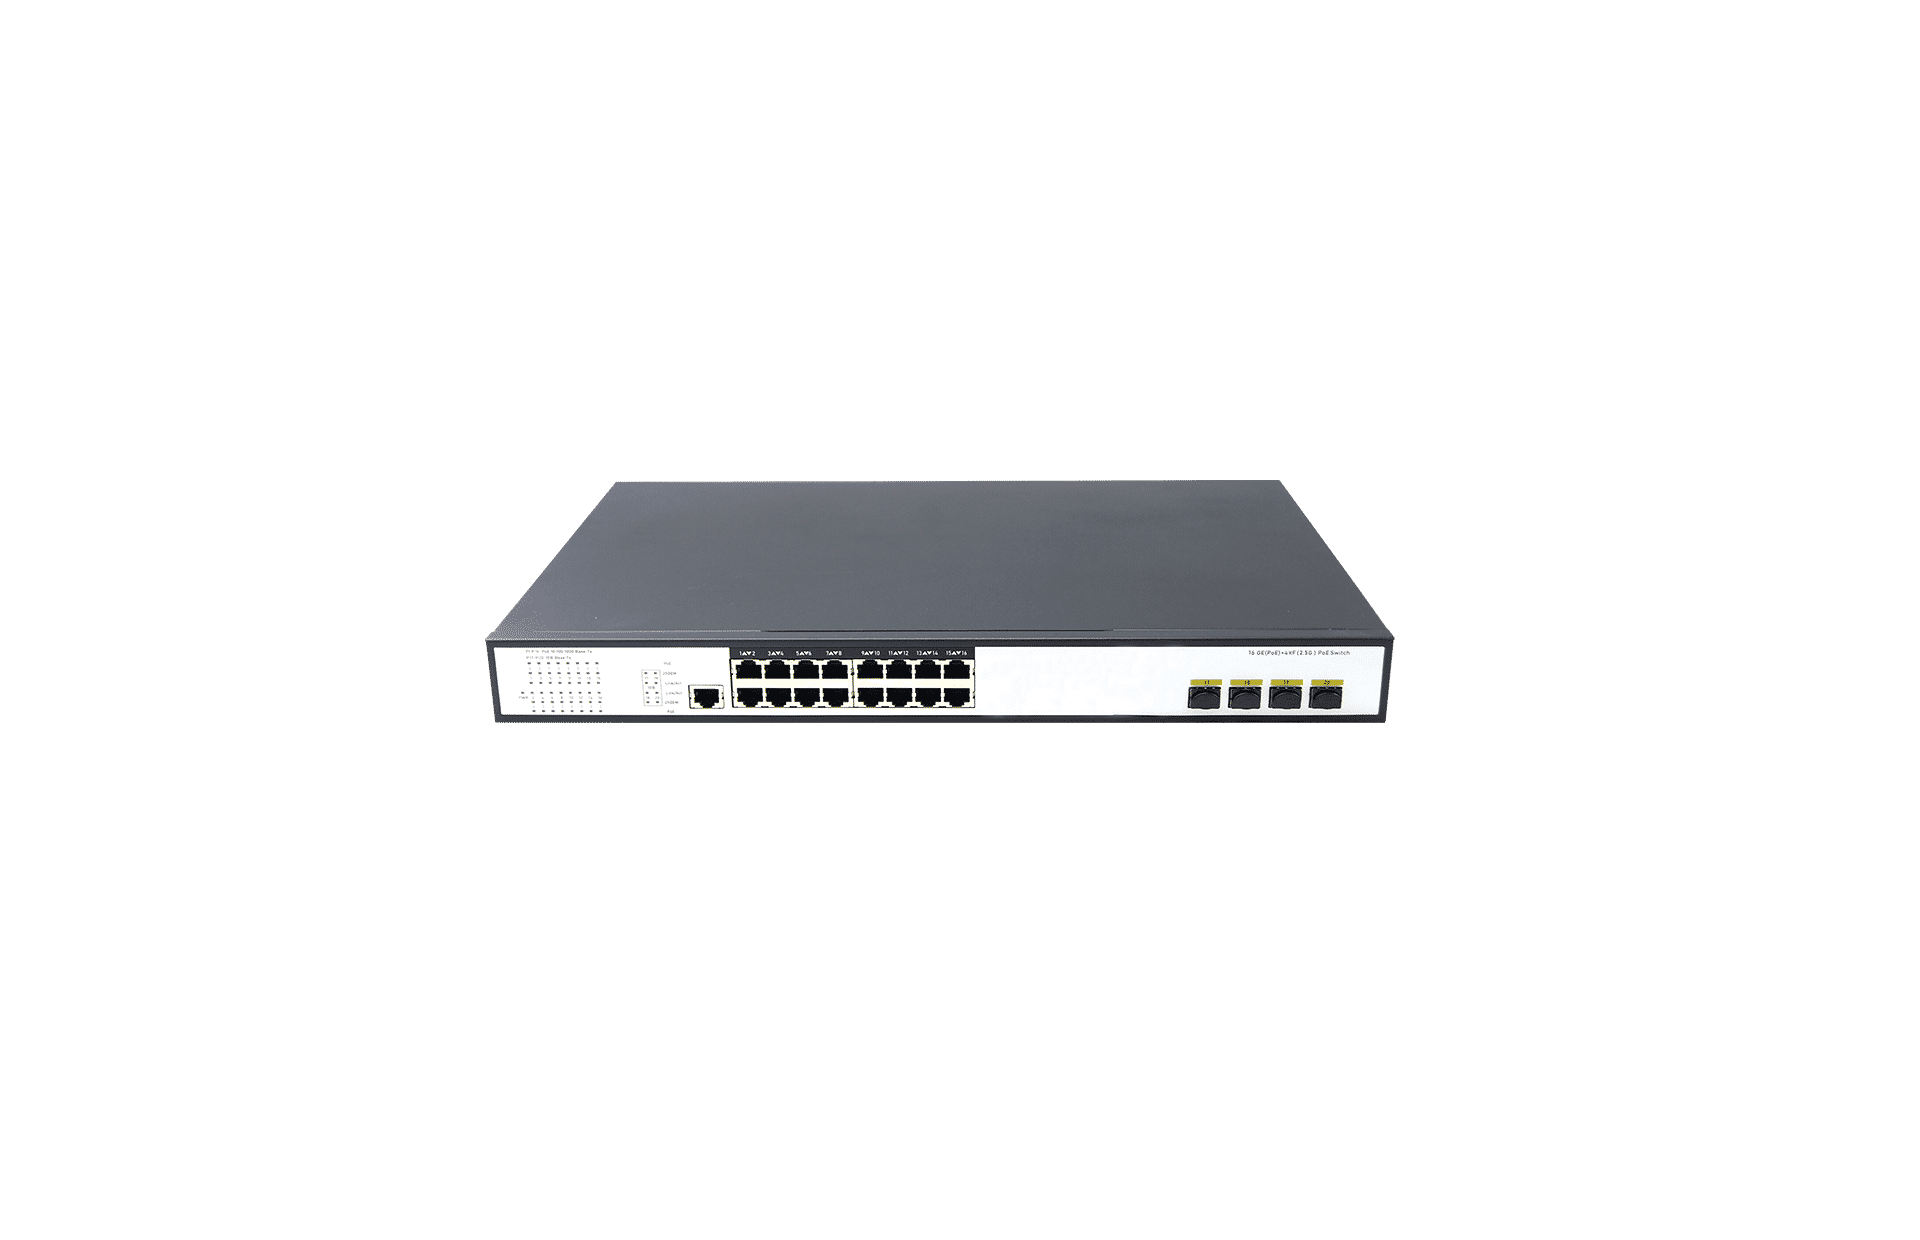 16 Ports 10/100/1000Mbps Managed PoE Switch with 4 Ports 2.5G SFP+ 